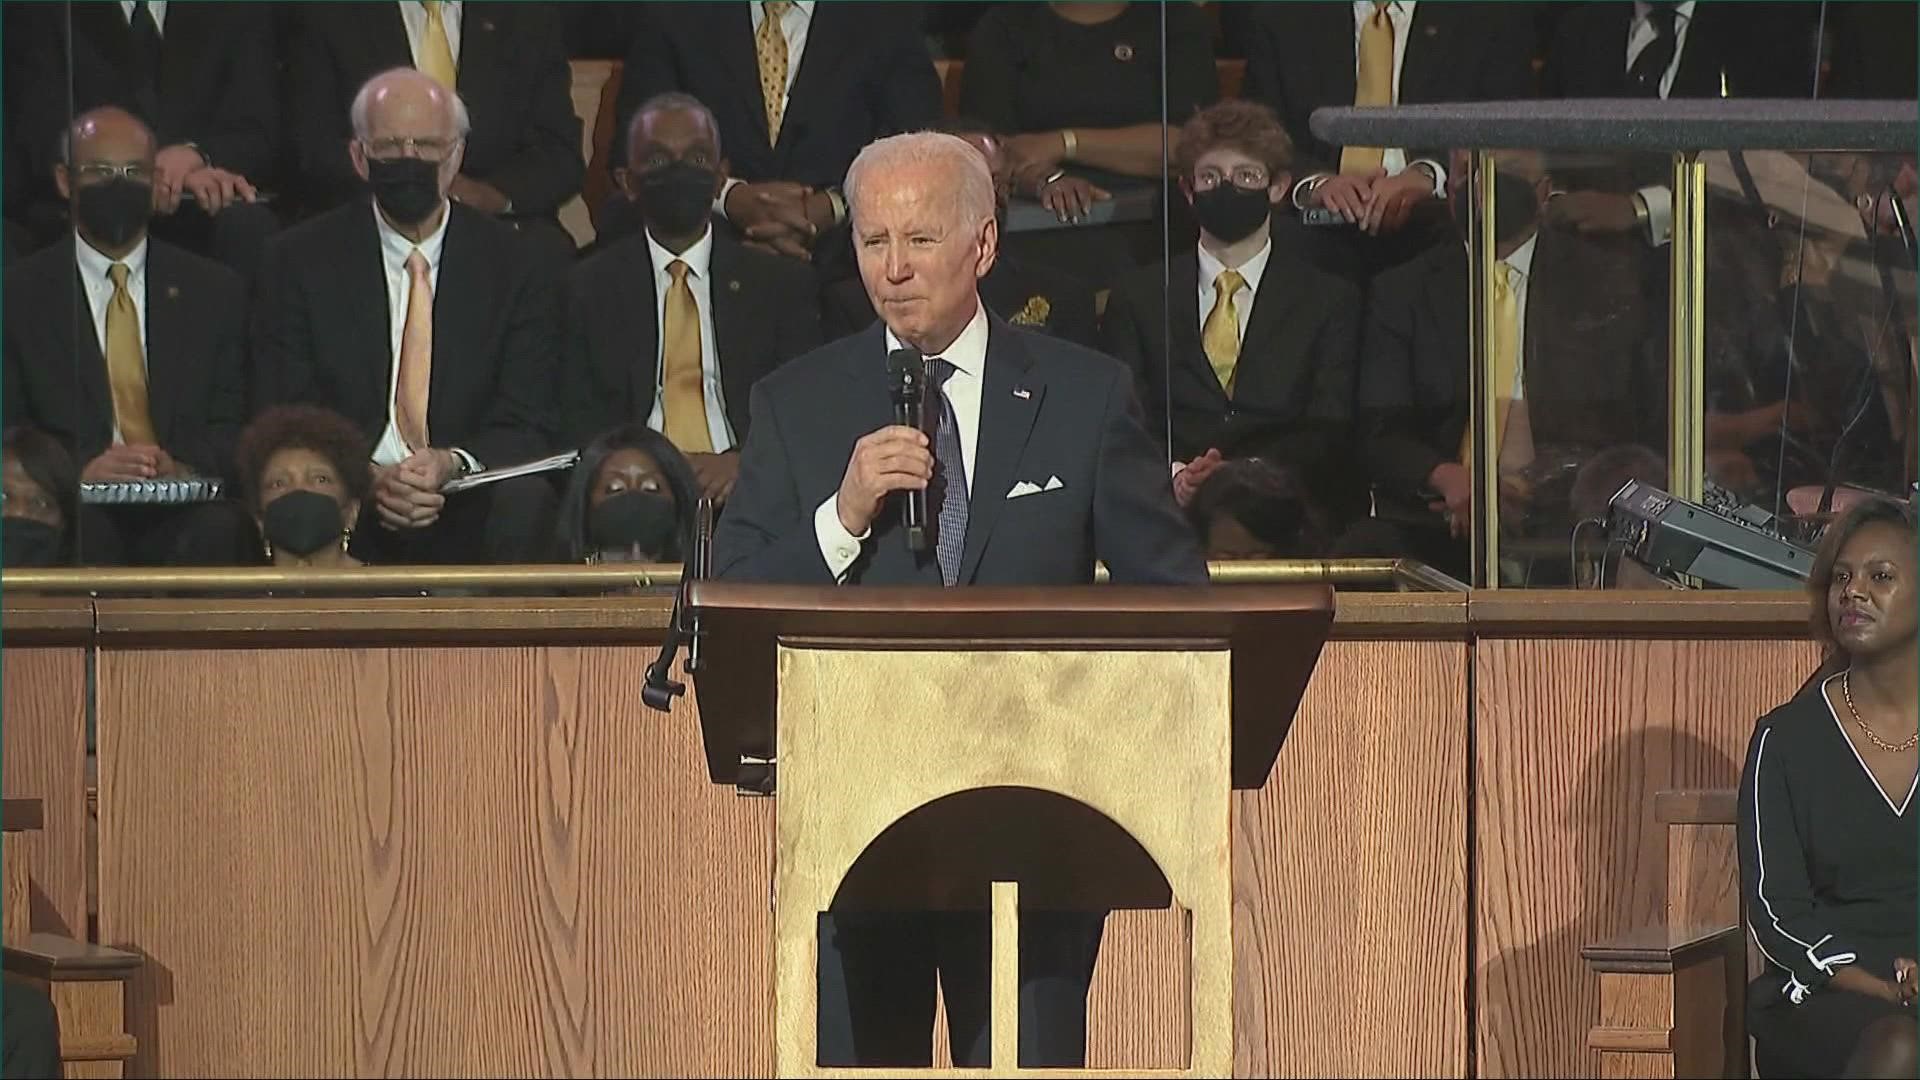 Biden was the first sitting president to deliver a Sunday morning sermon at King's Ebenezer Baptist Church.